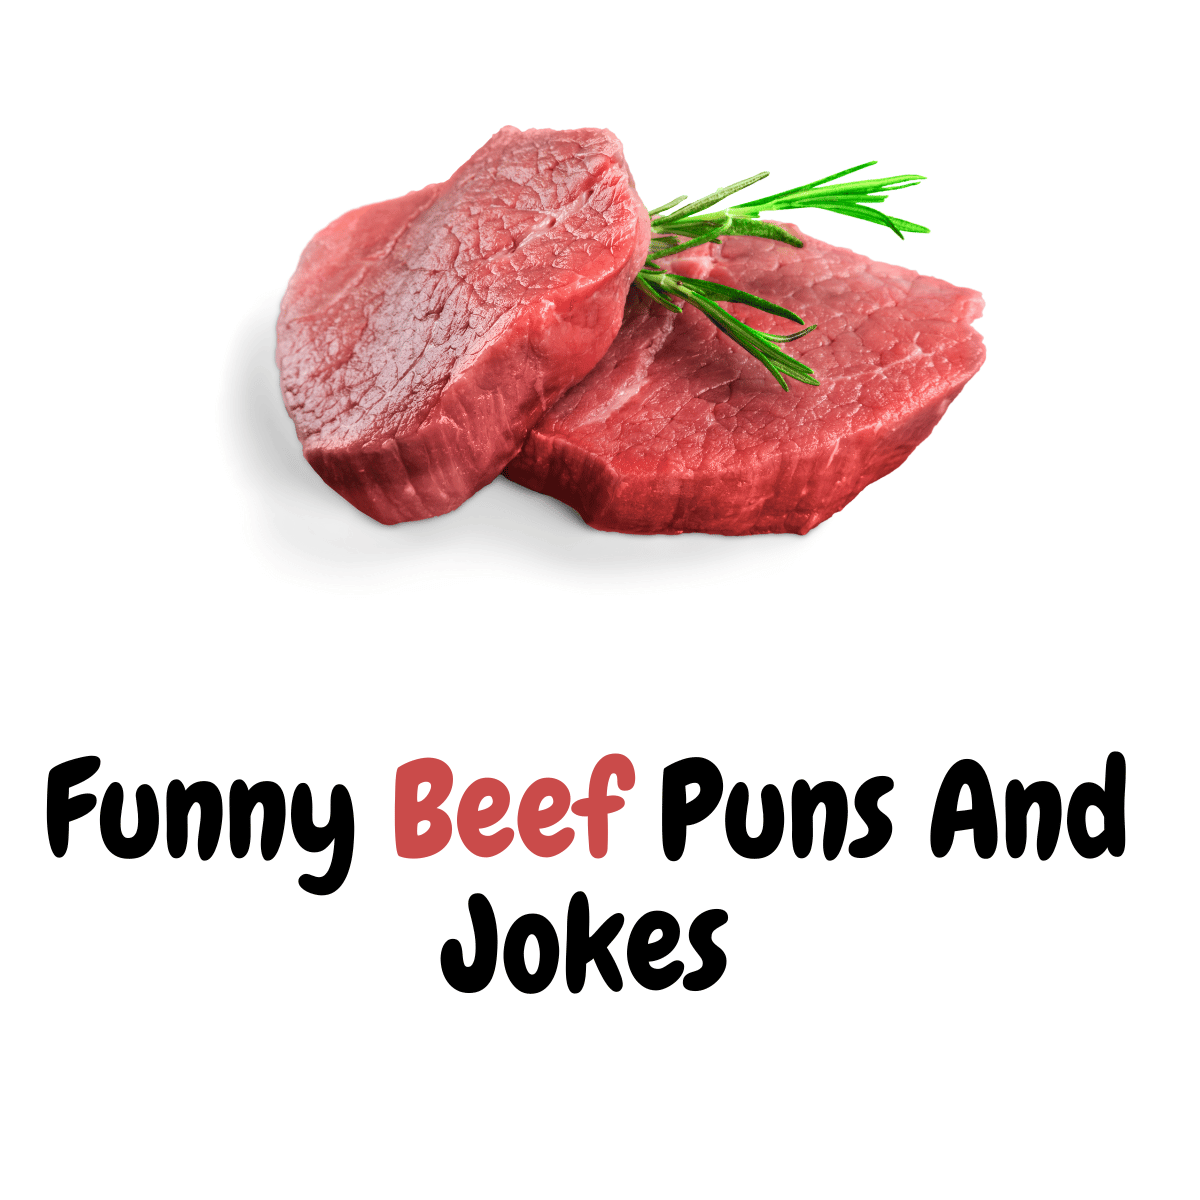 Funny Beef Puns And Jokes